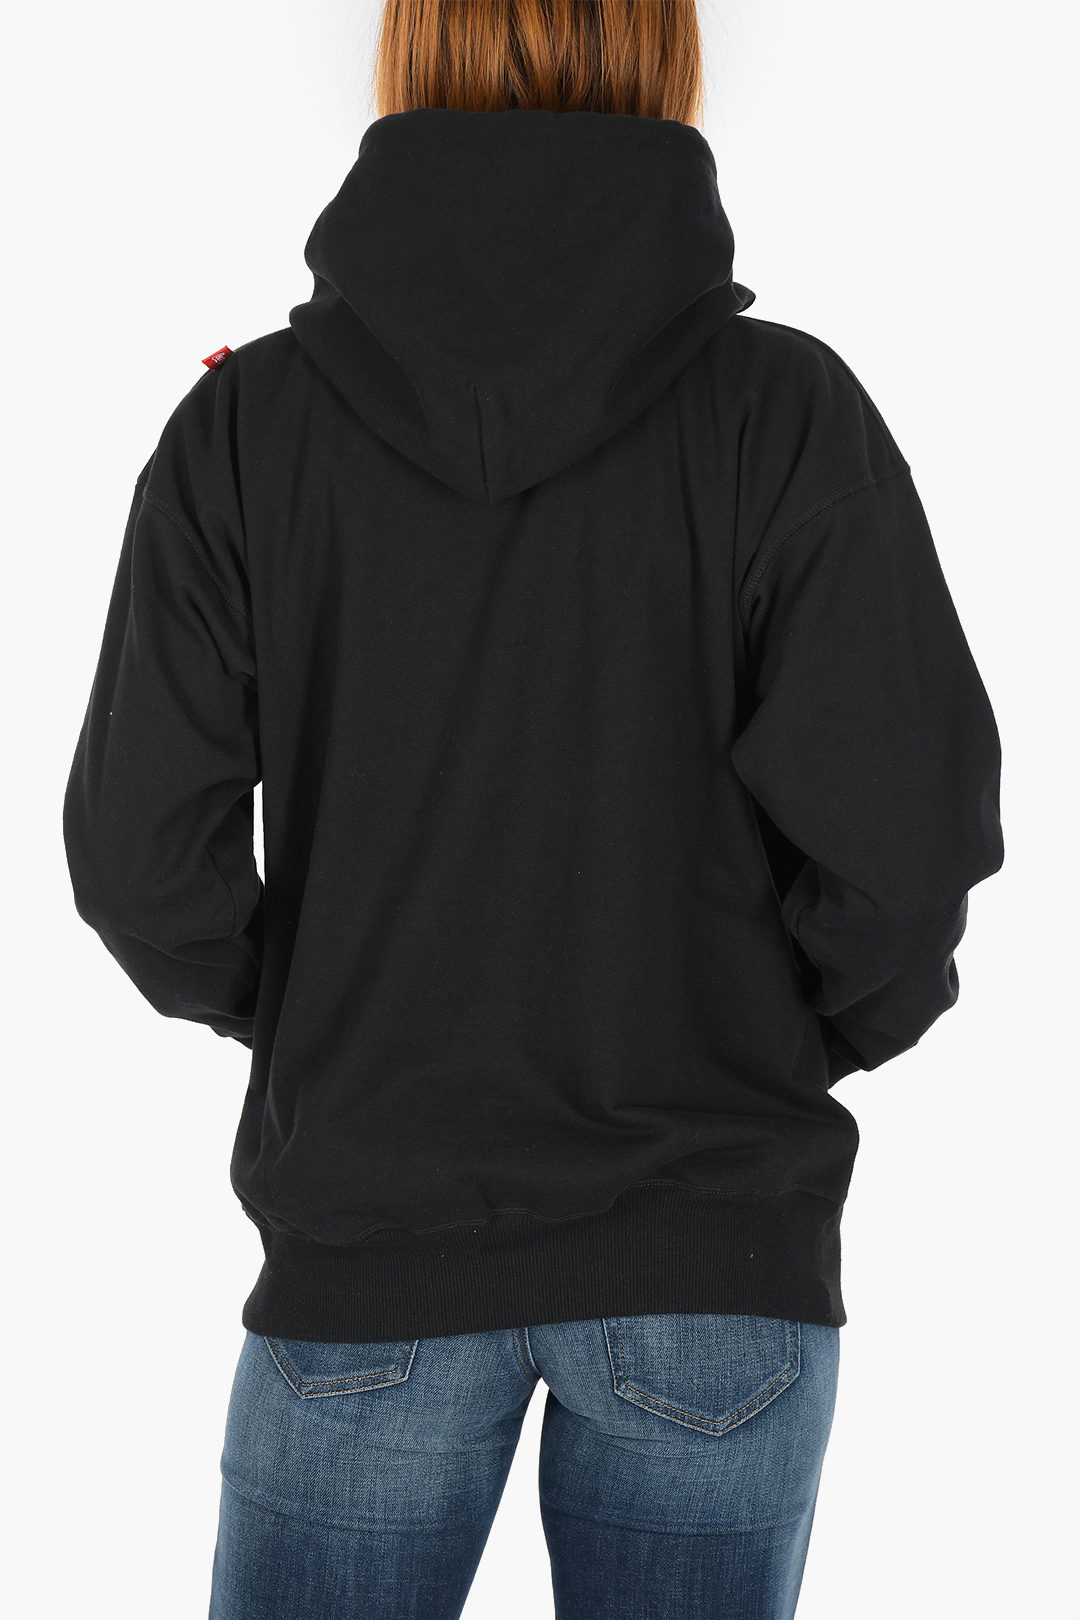 COCA COLA hooded CC-S-ALBY-COLA sweatshirt with maxi patch pocket